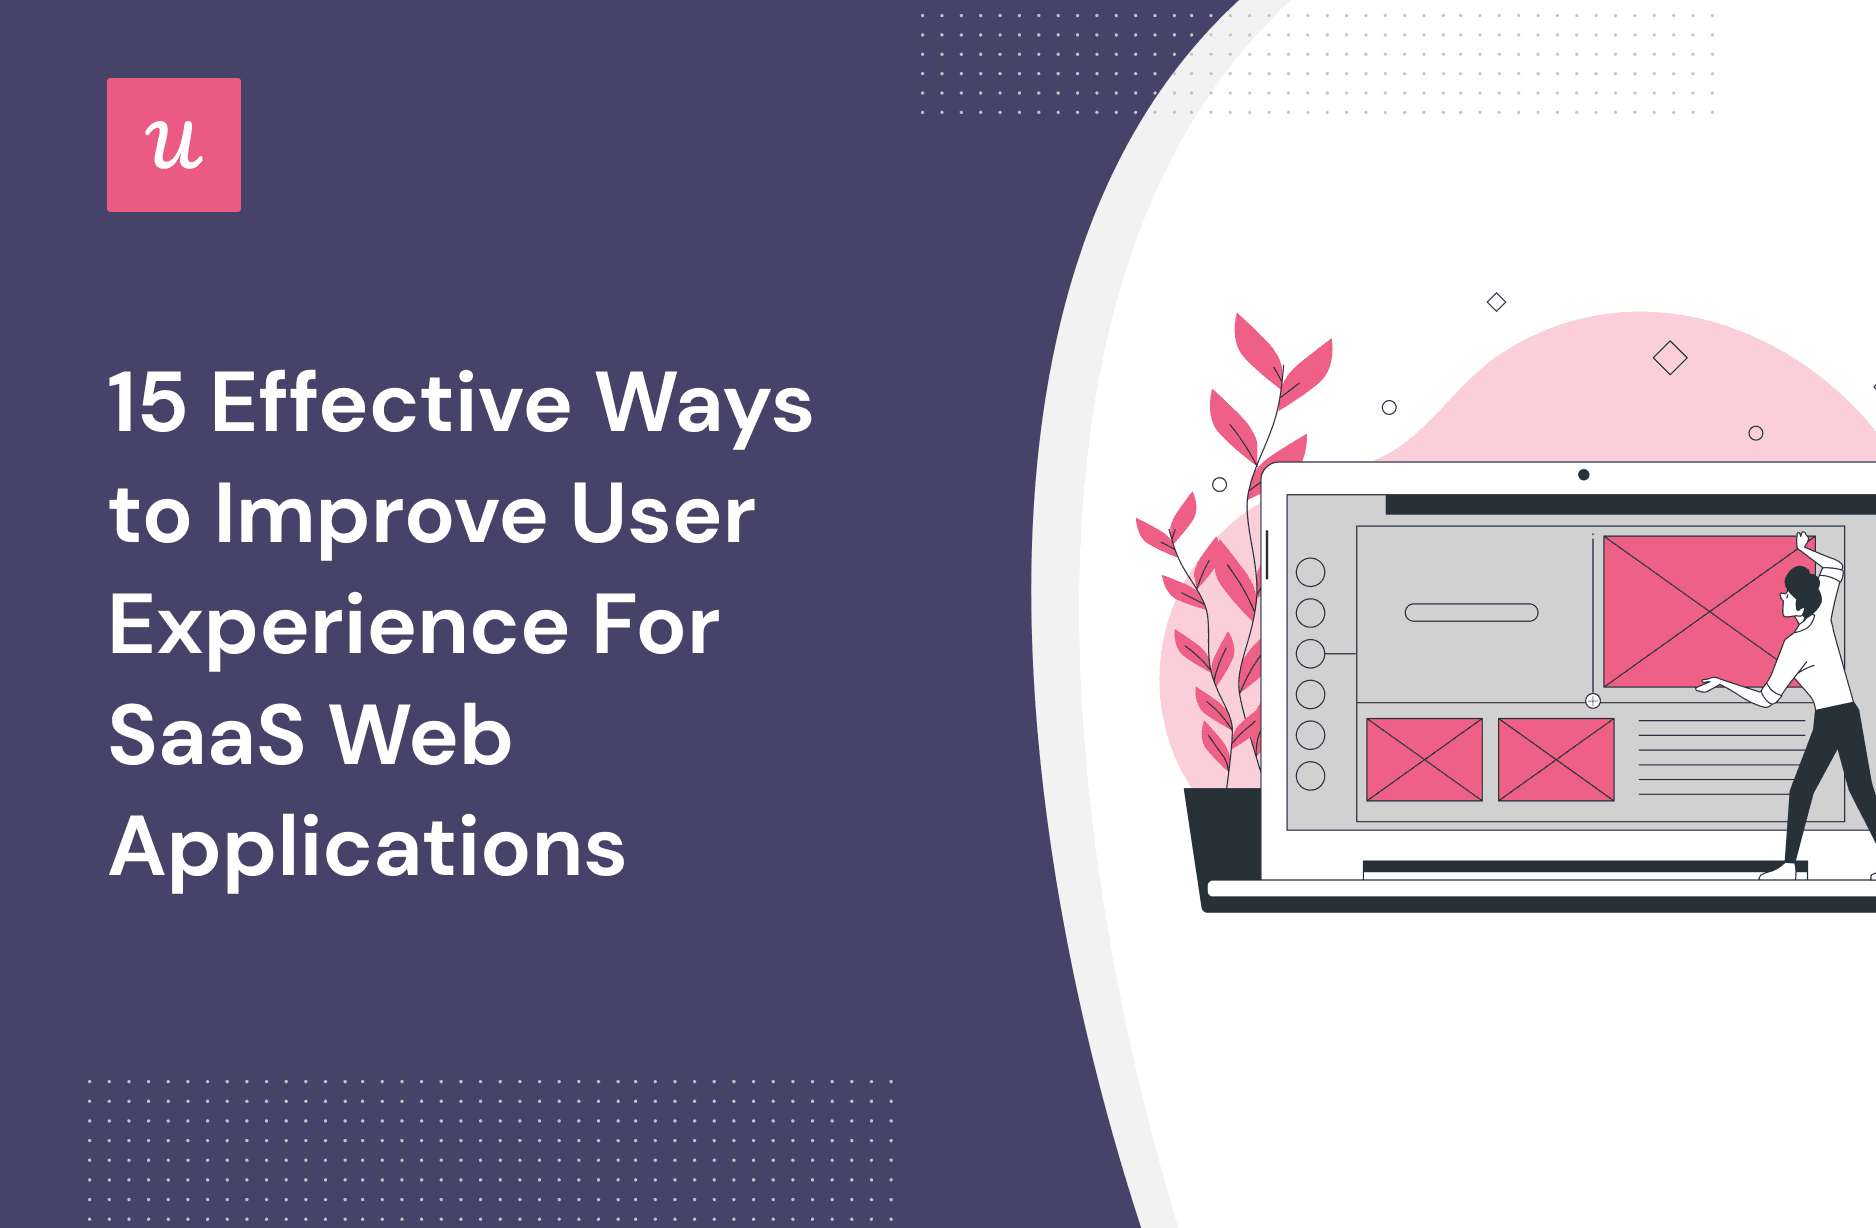 15 Effective Ways to Improve User Experience For SaaS Web Applications cover